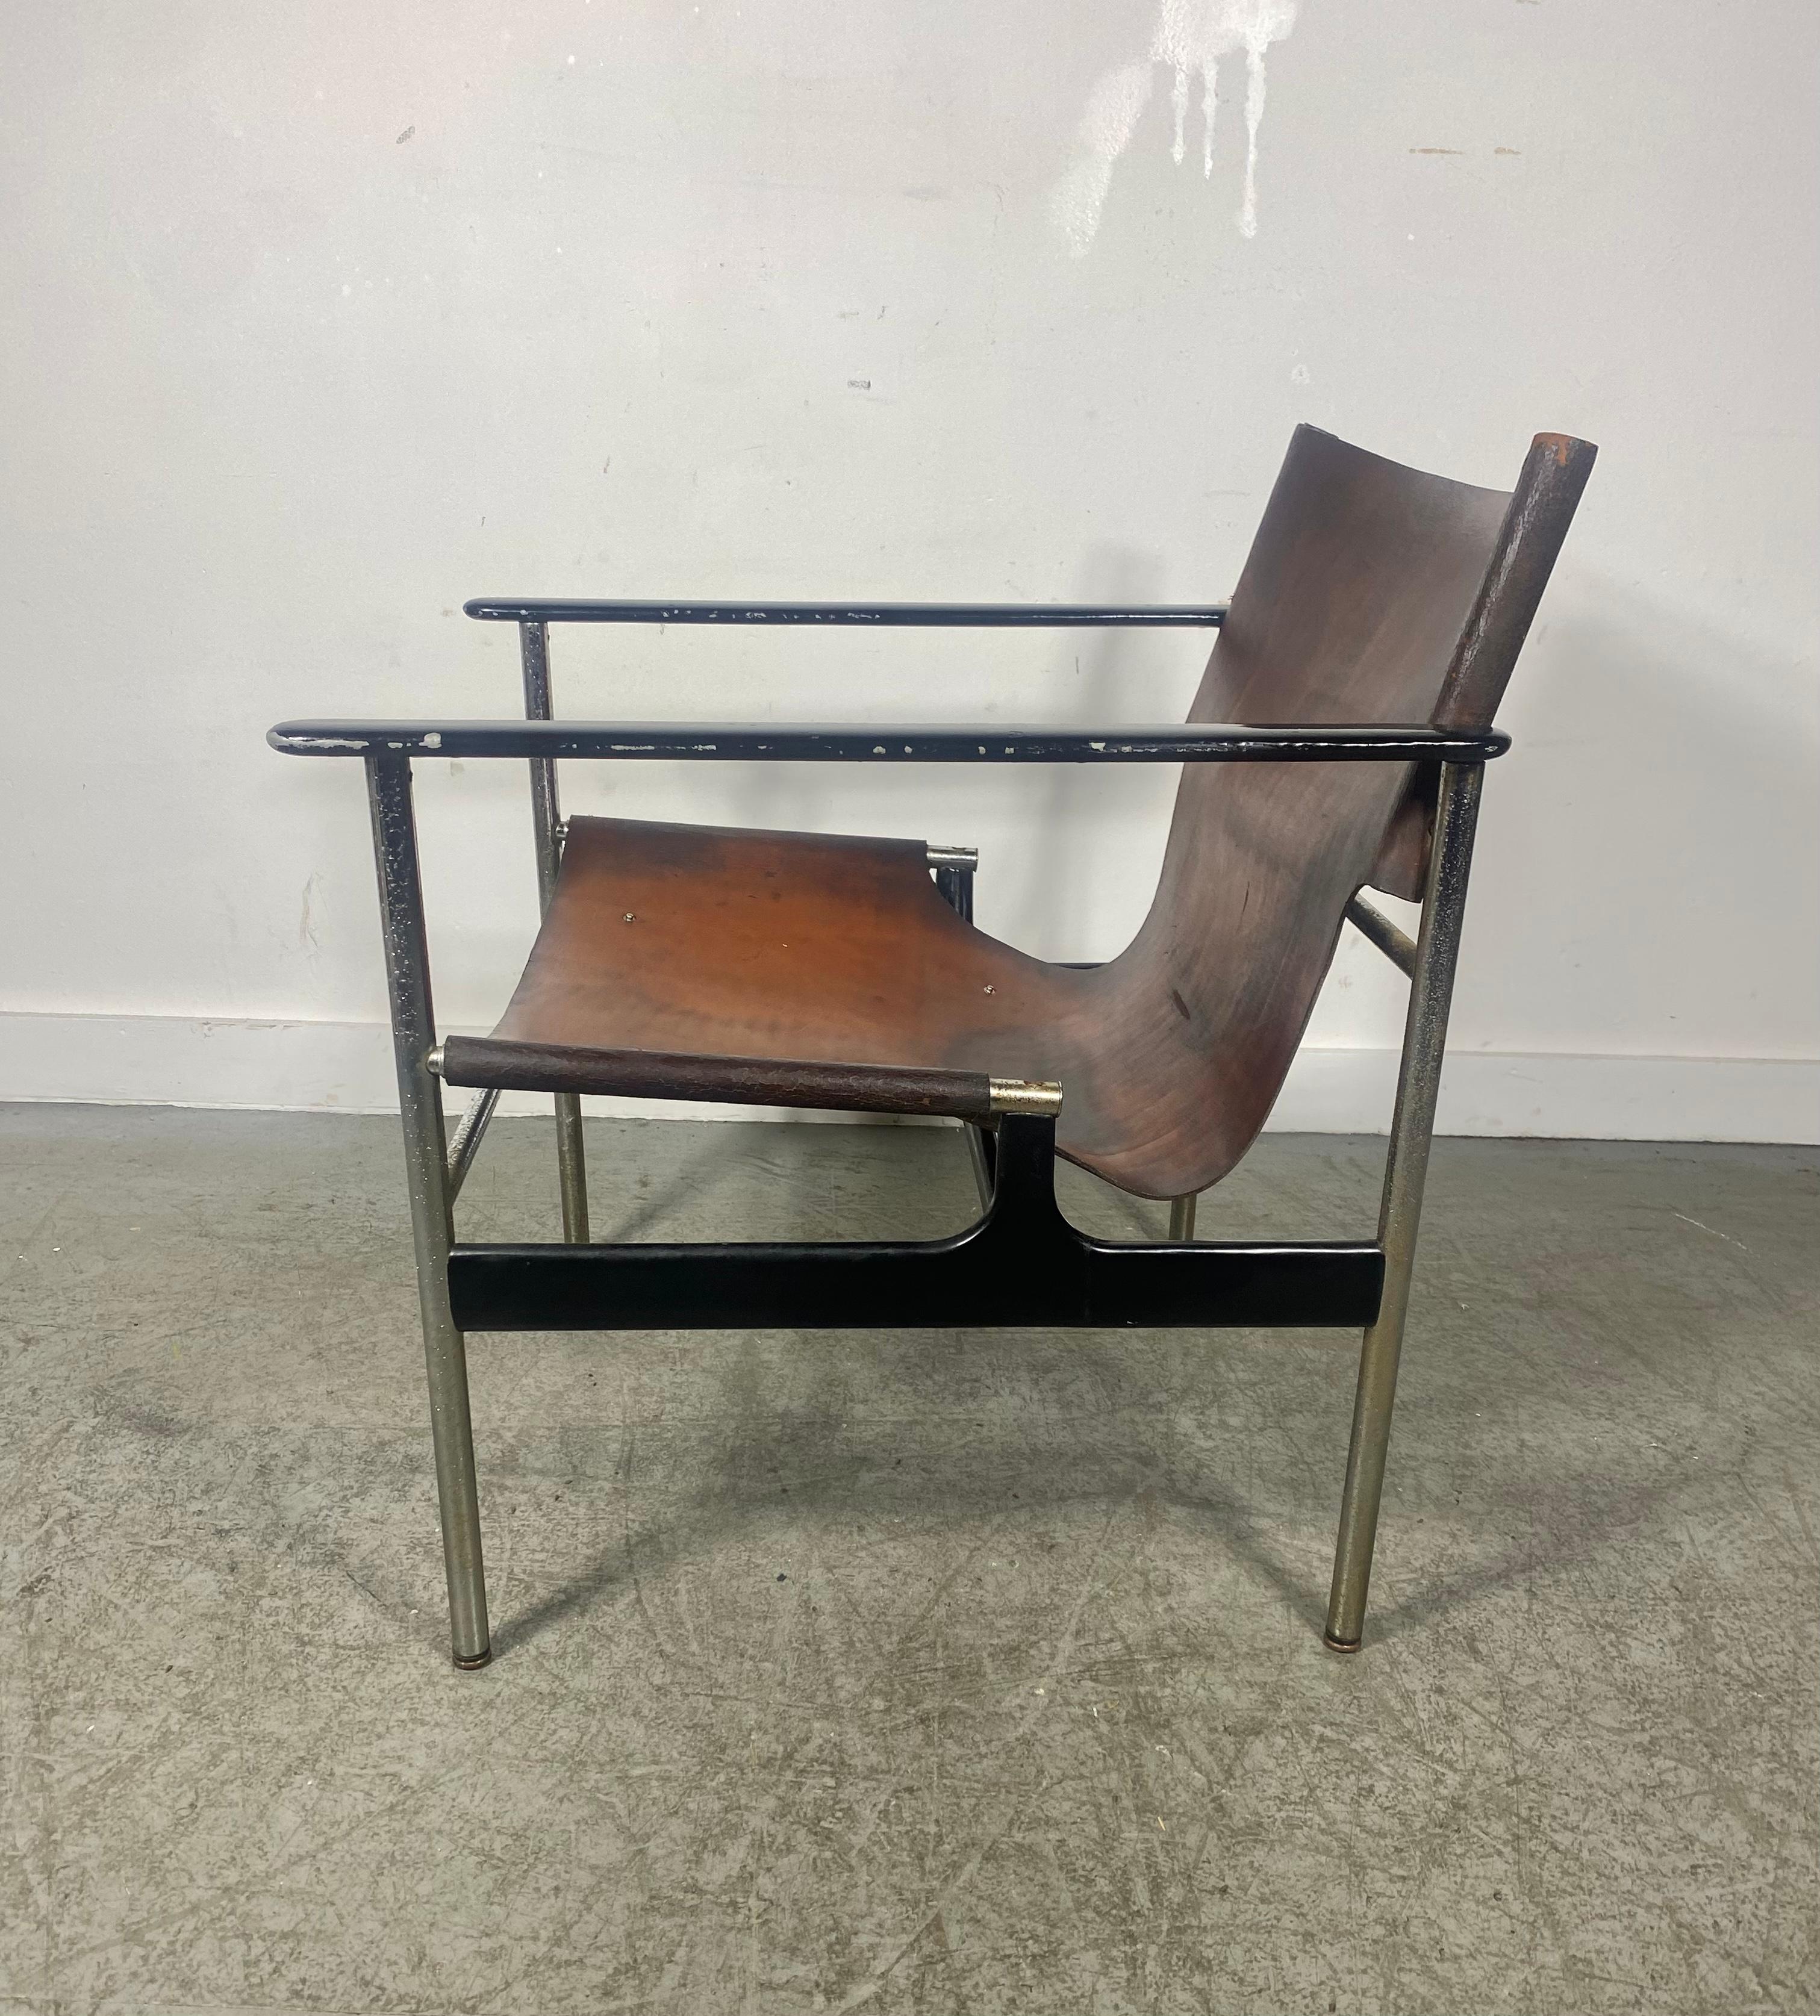 A nice early example the Rare model 657 leather sling lounge chair by Charles  Pollock for Knoll, circa 1960. The leather has wonderful rick dark brown patina and is in good Vintage Condition. Chrome has some pitting and metal arms some paint loss..